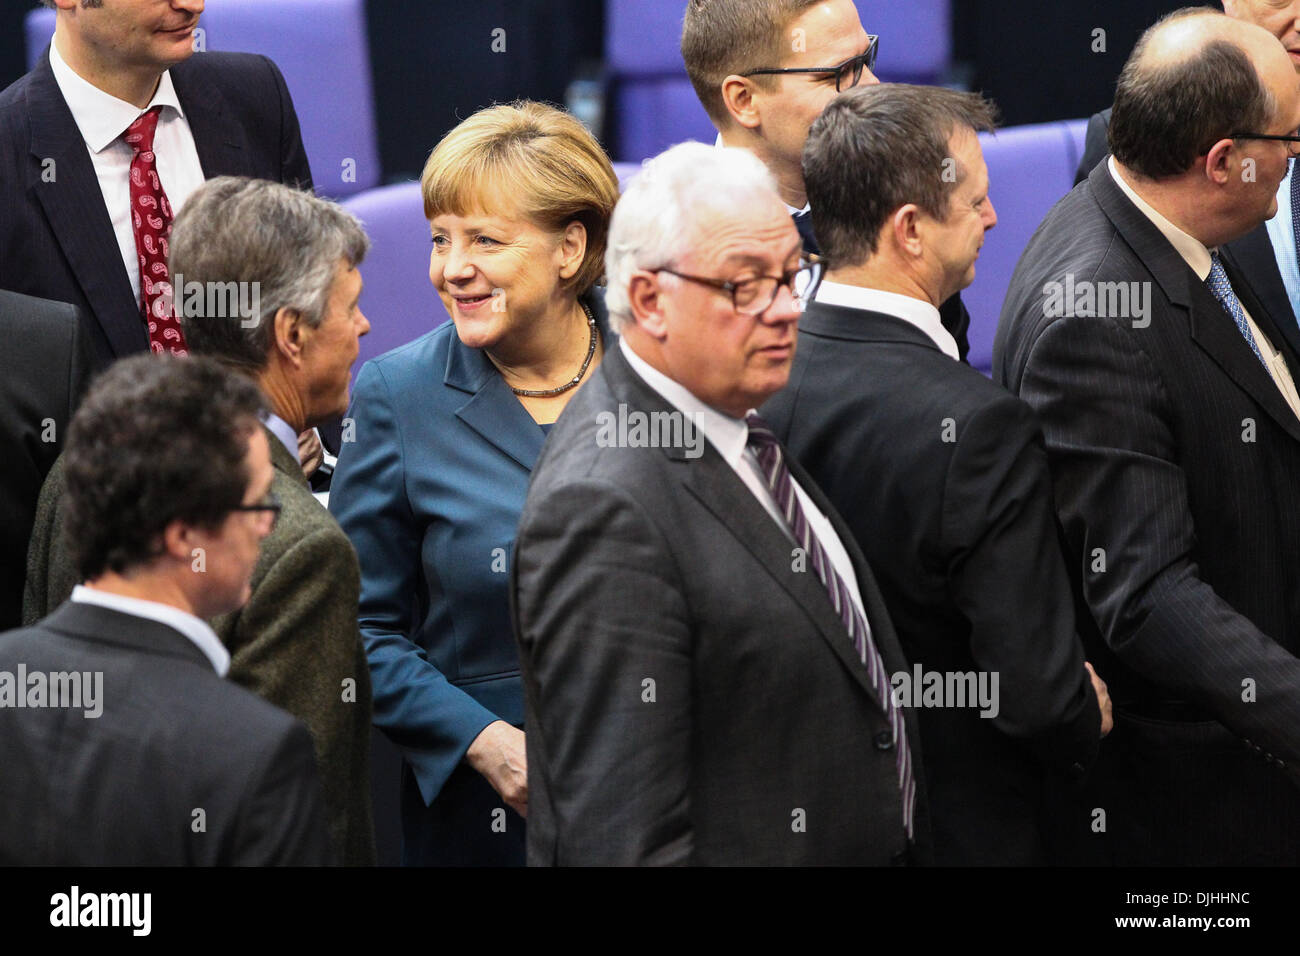 Berlin, Germany. 28th Nov, 2013. German Chancellor Angela Merkel (C) attends the plenary session of the Bundestag (lower house of parliament) in Berlin, Germany, on Nov. 28, 2013. Credit:  Zhang Fan/Xinhua/Alamy Live News Stock Photo